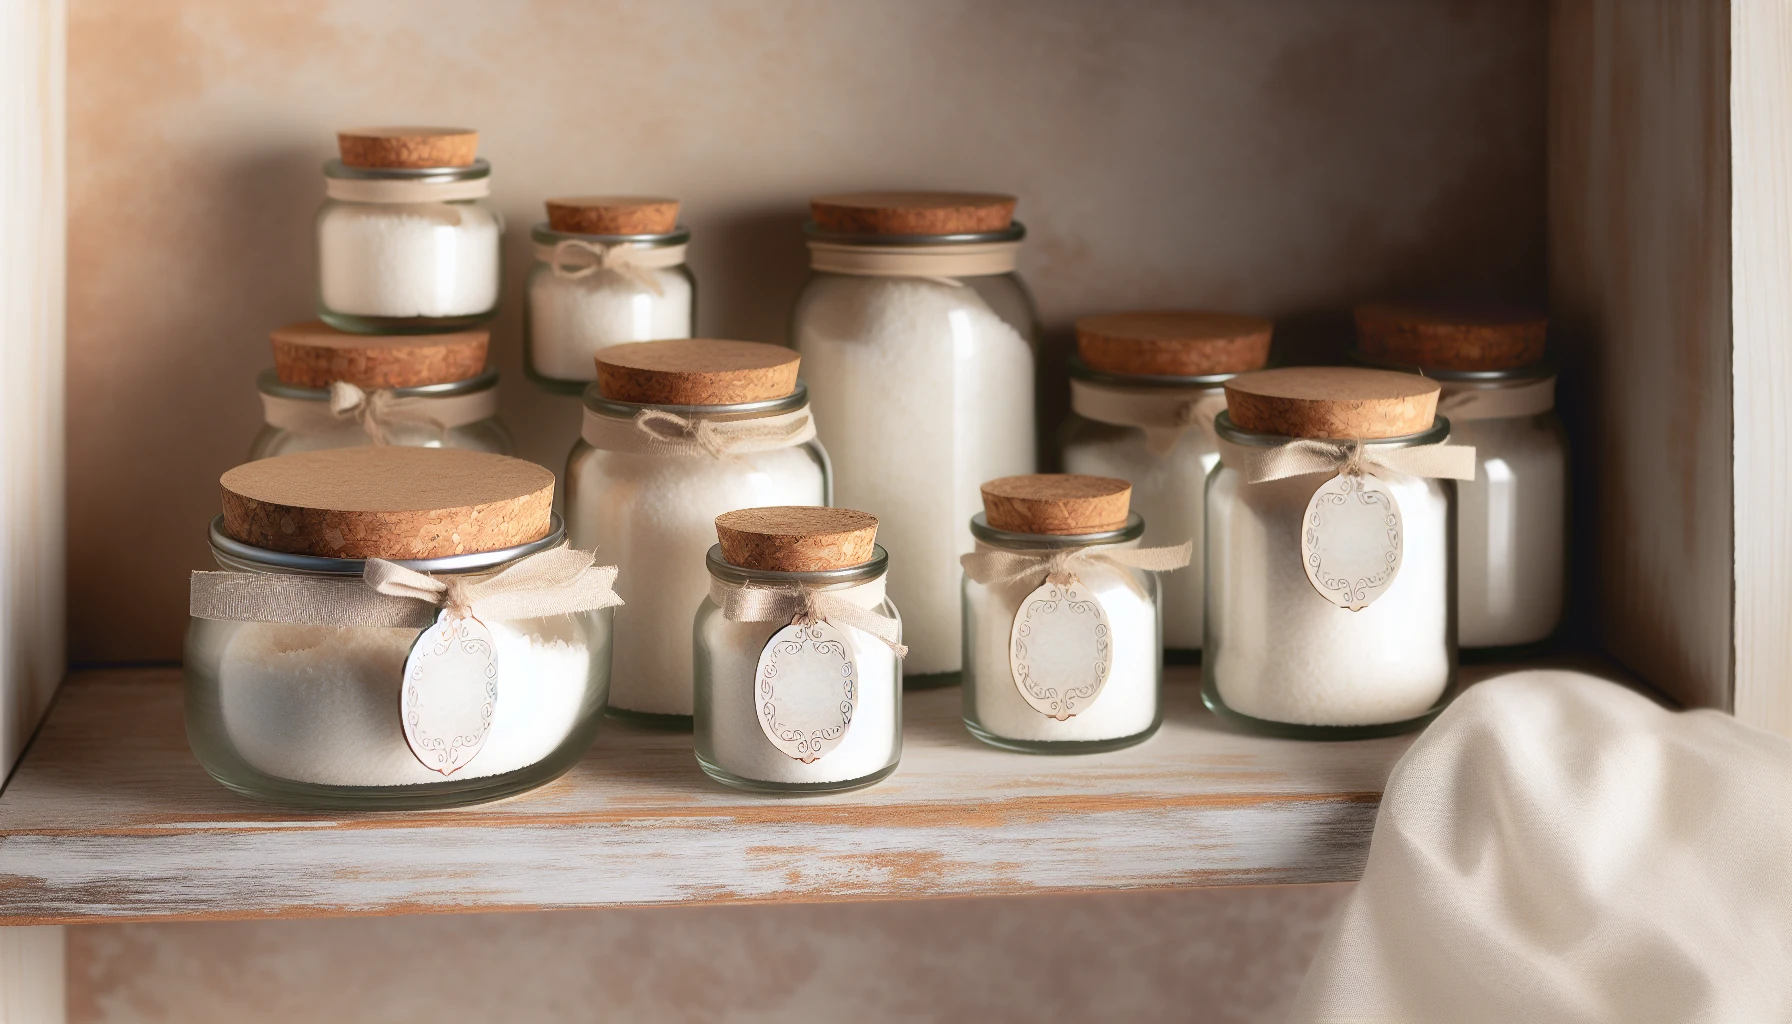 Homemade milk bath stored in decorative jars with printable labels